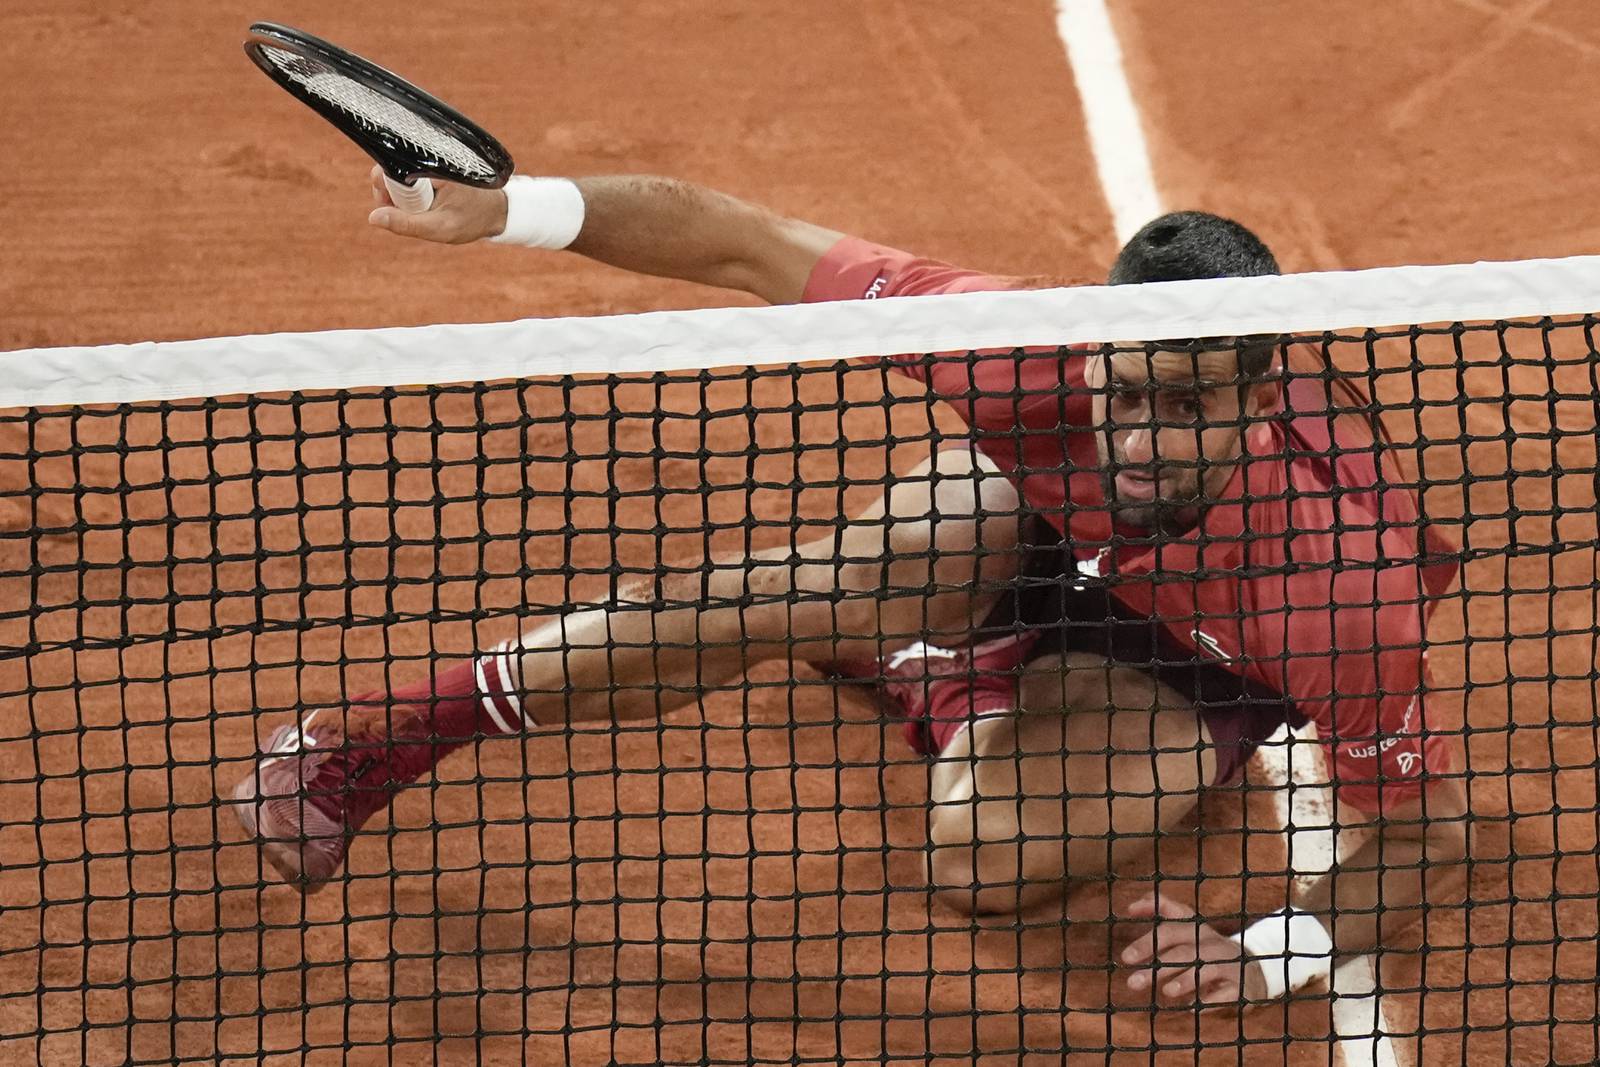 Novak Djokovic begins his bid for a 25th Grand Slam title with a first